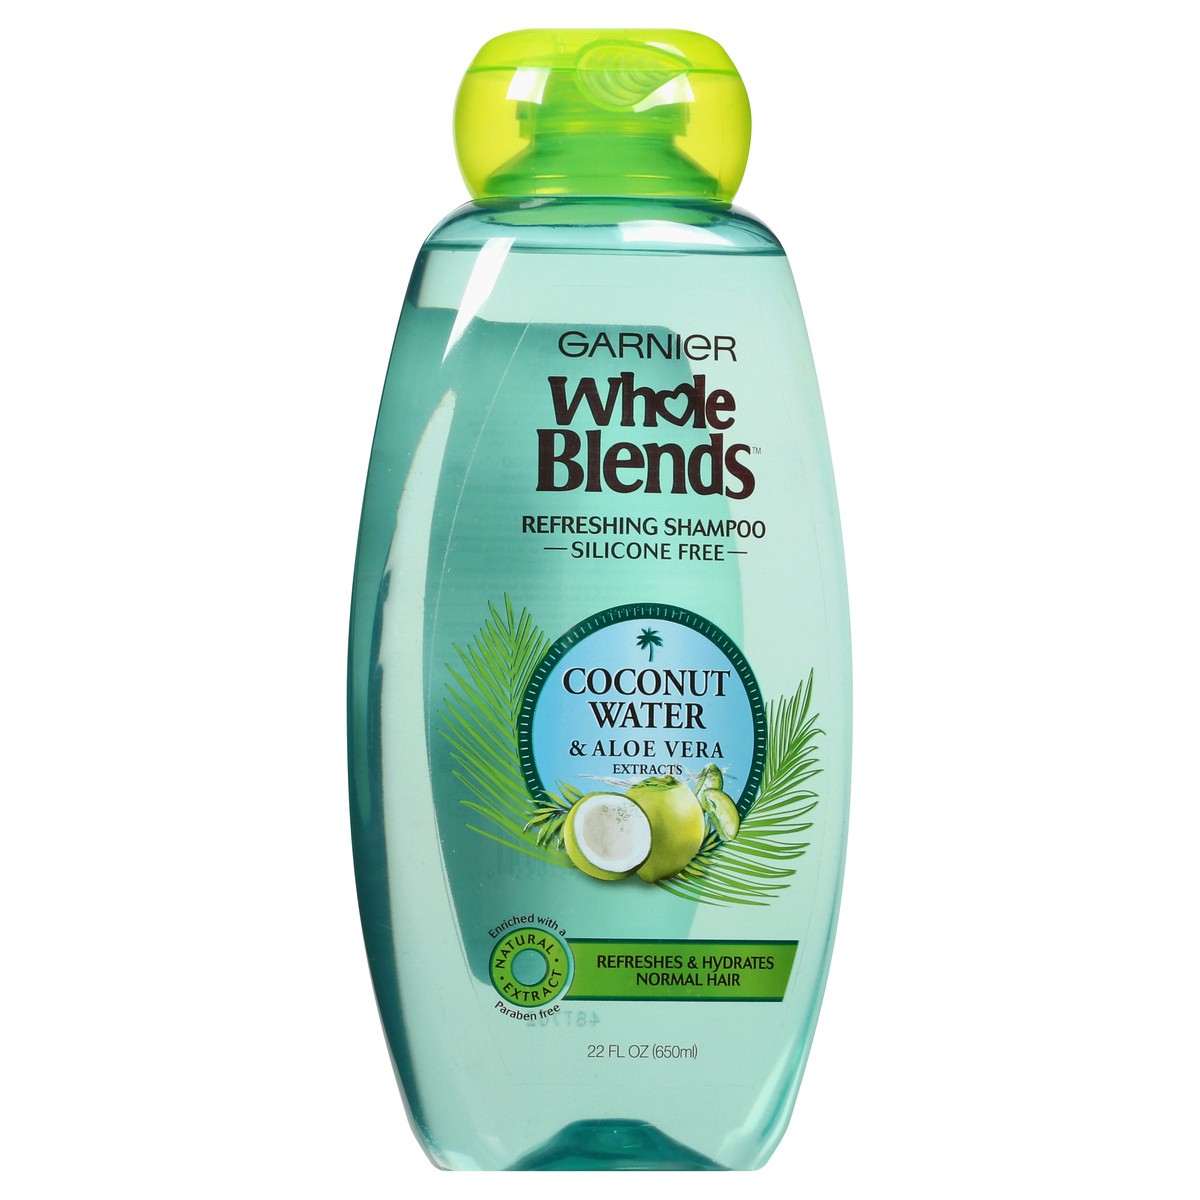 slide 5 of 11, Whole Blends Refreshing Coconut Water & Aloe Vera Extracts Shampoo 22 oz, 22 oz